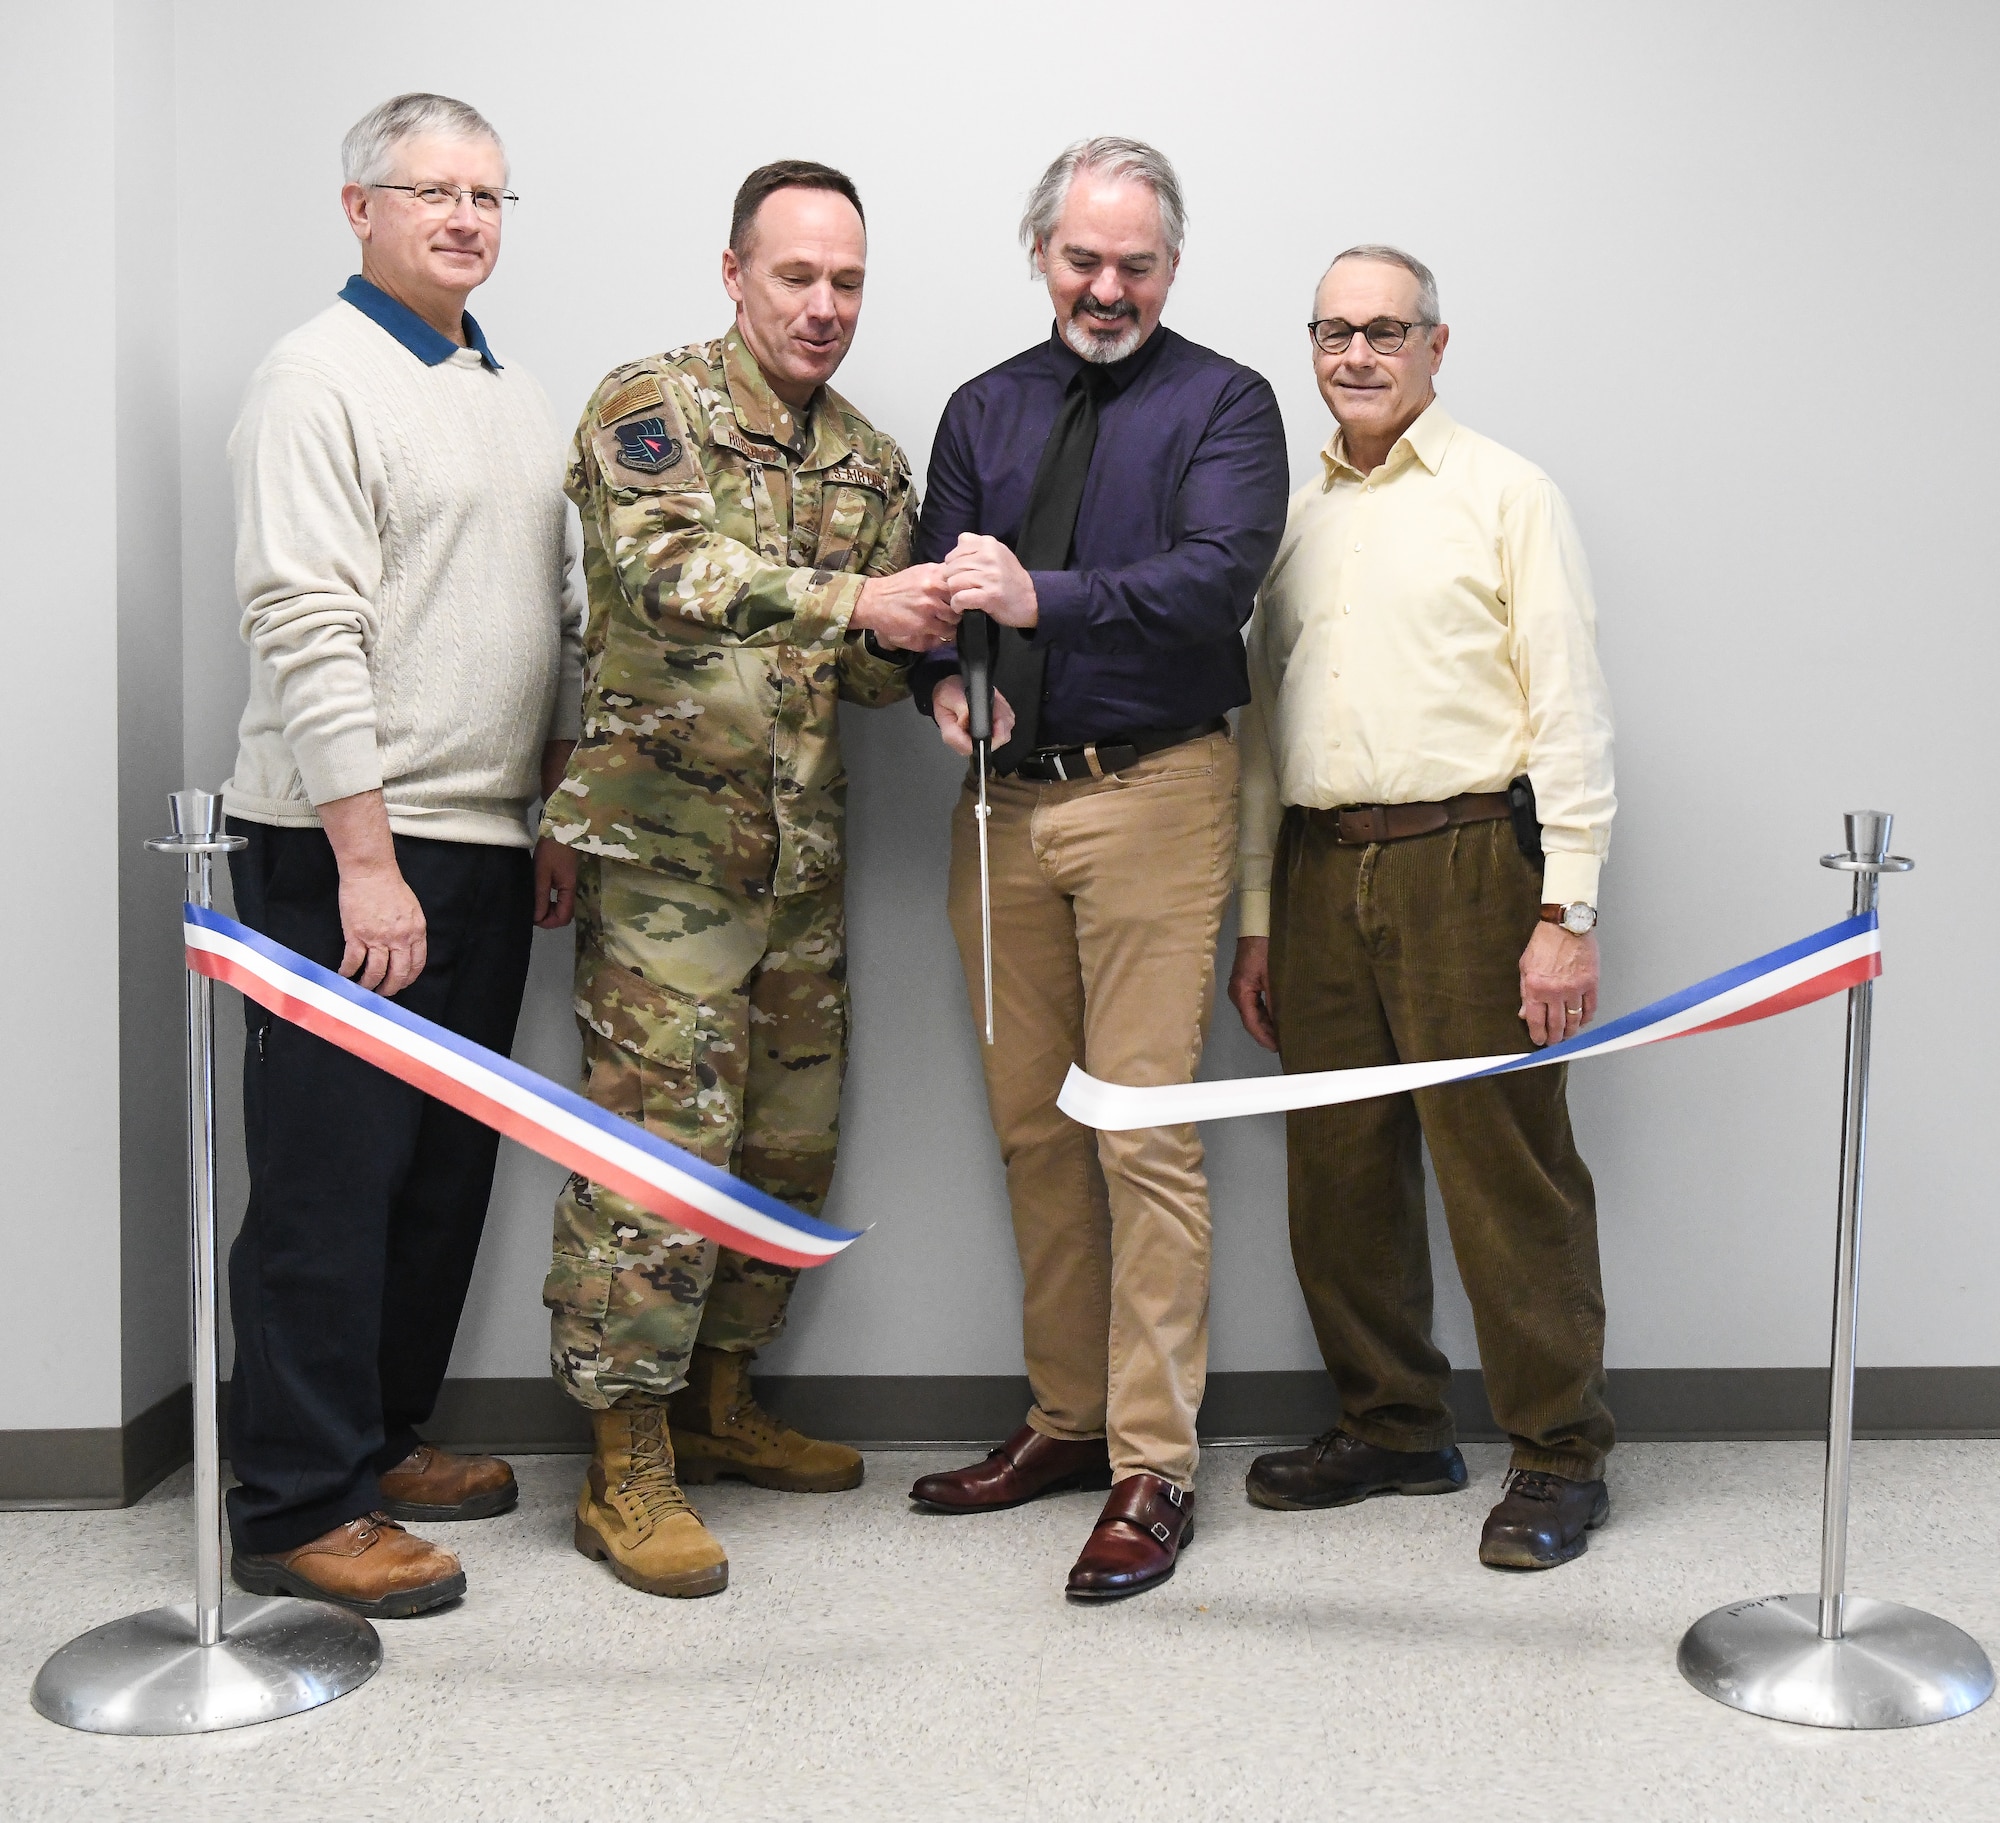 Air Force project manager Tony Pennington, second from right, and Col. Charles Roberts, Test Support Division chief, cut a ribbon, Jan. 6, to celebrate the renovation of the Civil Engineering, Operations and Maintenance Building at Arnold Air Force Base, Tenn. Also pictured are Jerry Goodman, left, a project manager with the Test Operations and Sustainment (TOS) contract, and Barry Banks, a construction superintendent with TOS. (U.S. Air Force photo by Jill Pickett)